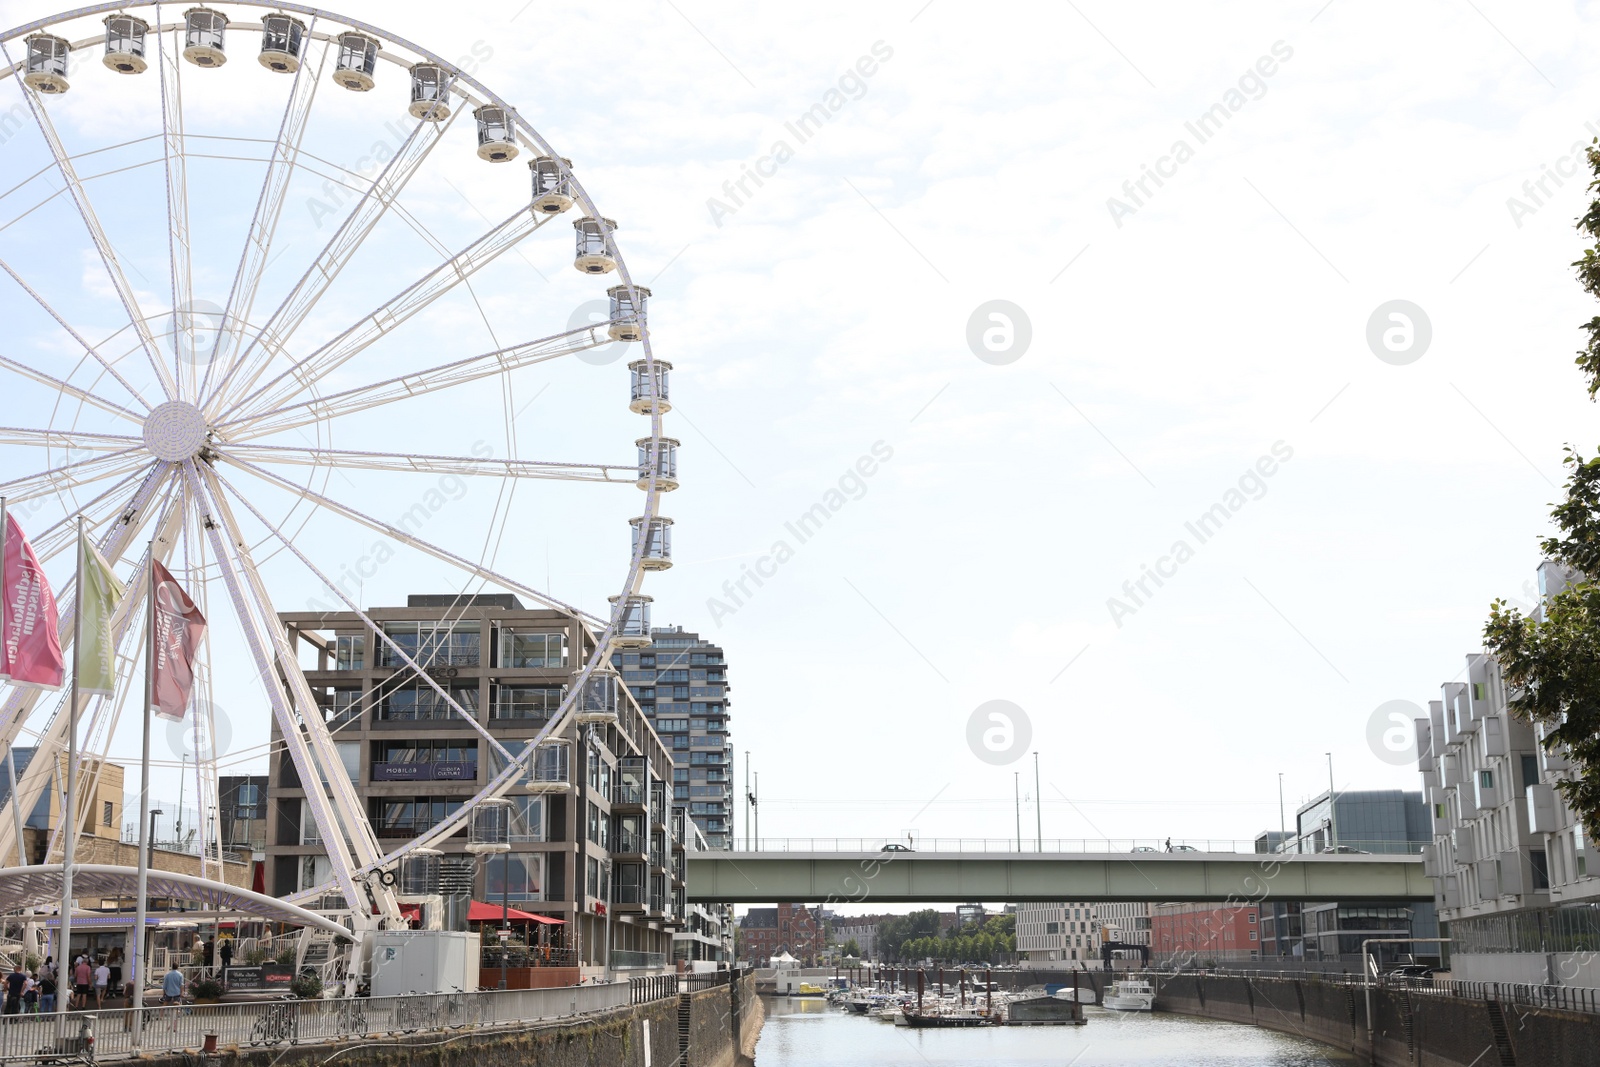 Photo of Cologne, Germany - August 28, 2022: Picturesque view of Ferris wheel in city near canal